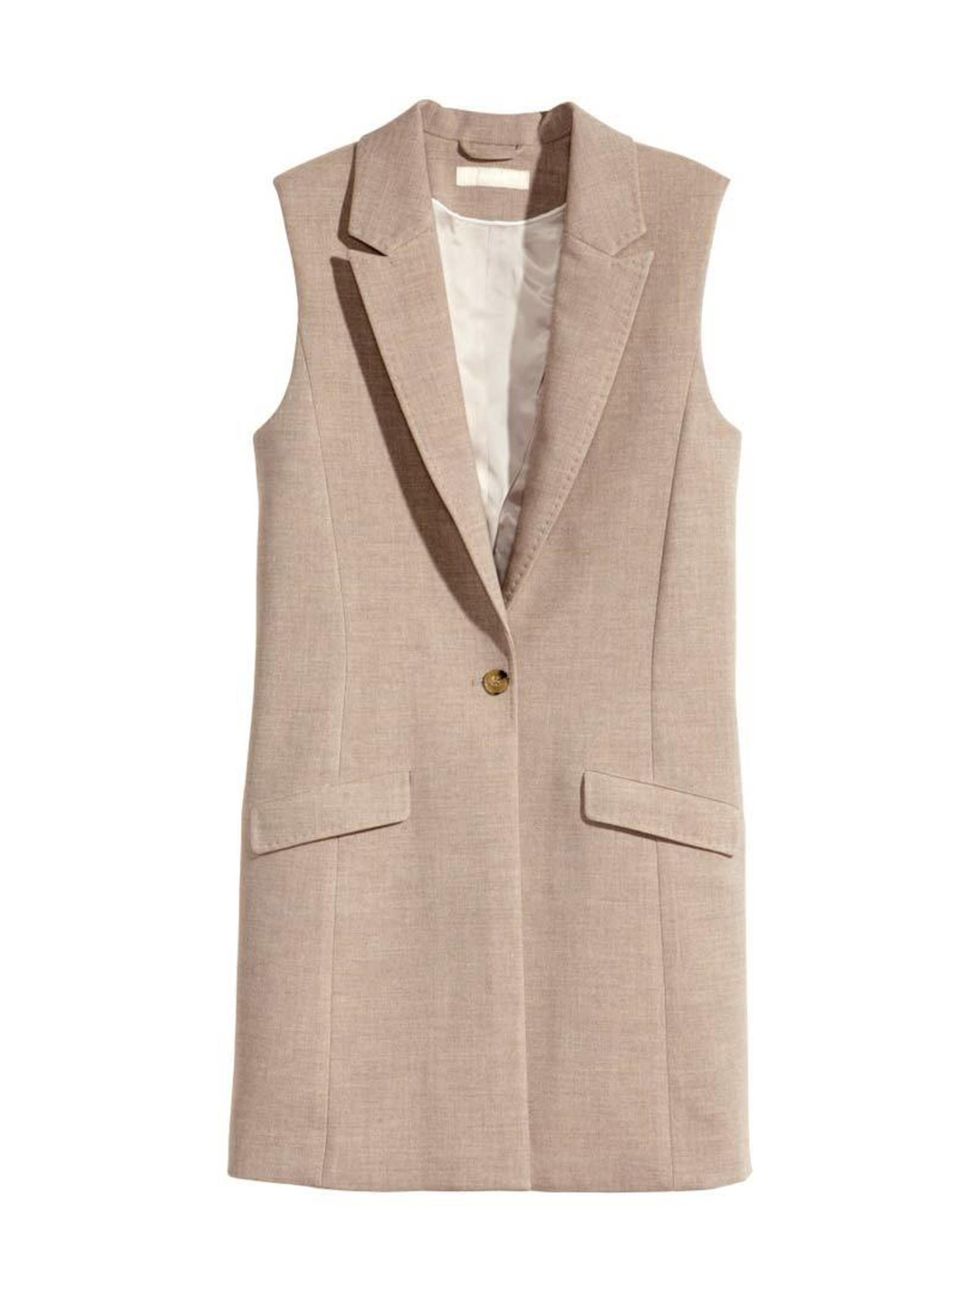 <p>Fashion Assistant Charlie Gowans-Eglinton will wear this long-line waistcoat over a poloneck and skinny jeans.</p>

<p><a href="http://www.hm.com/gb/product/89738?article=89738-A" target="_blank">H&M</a> waistcoat, £49.99</p>